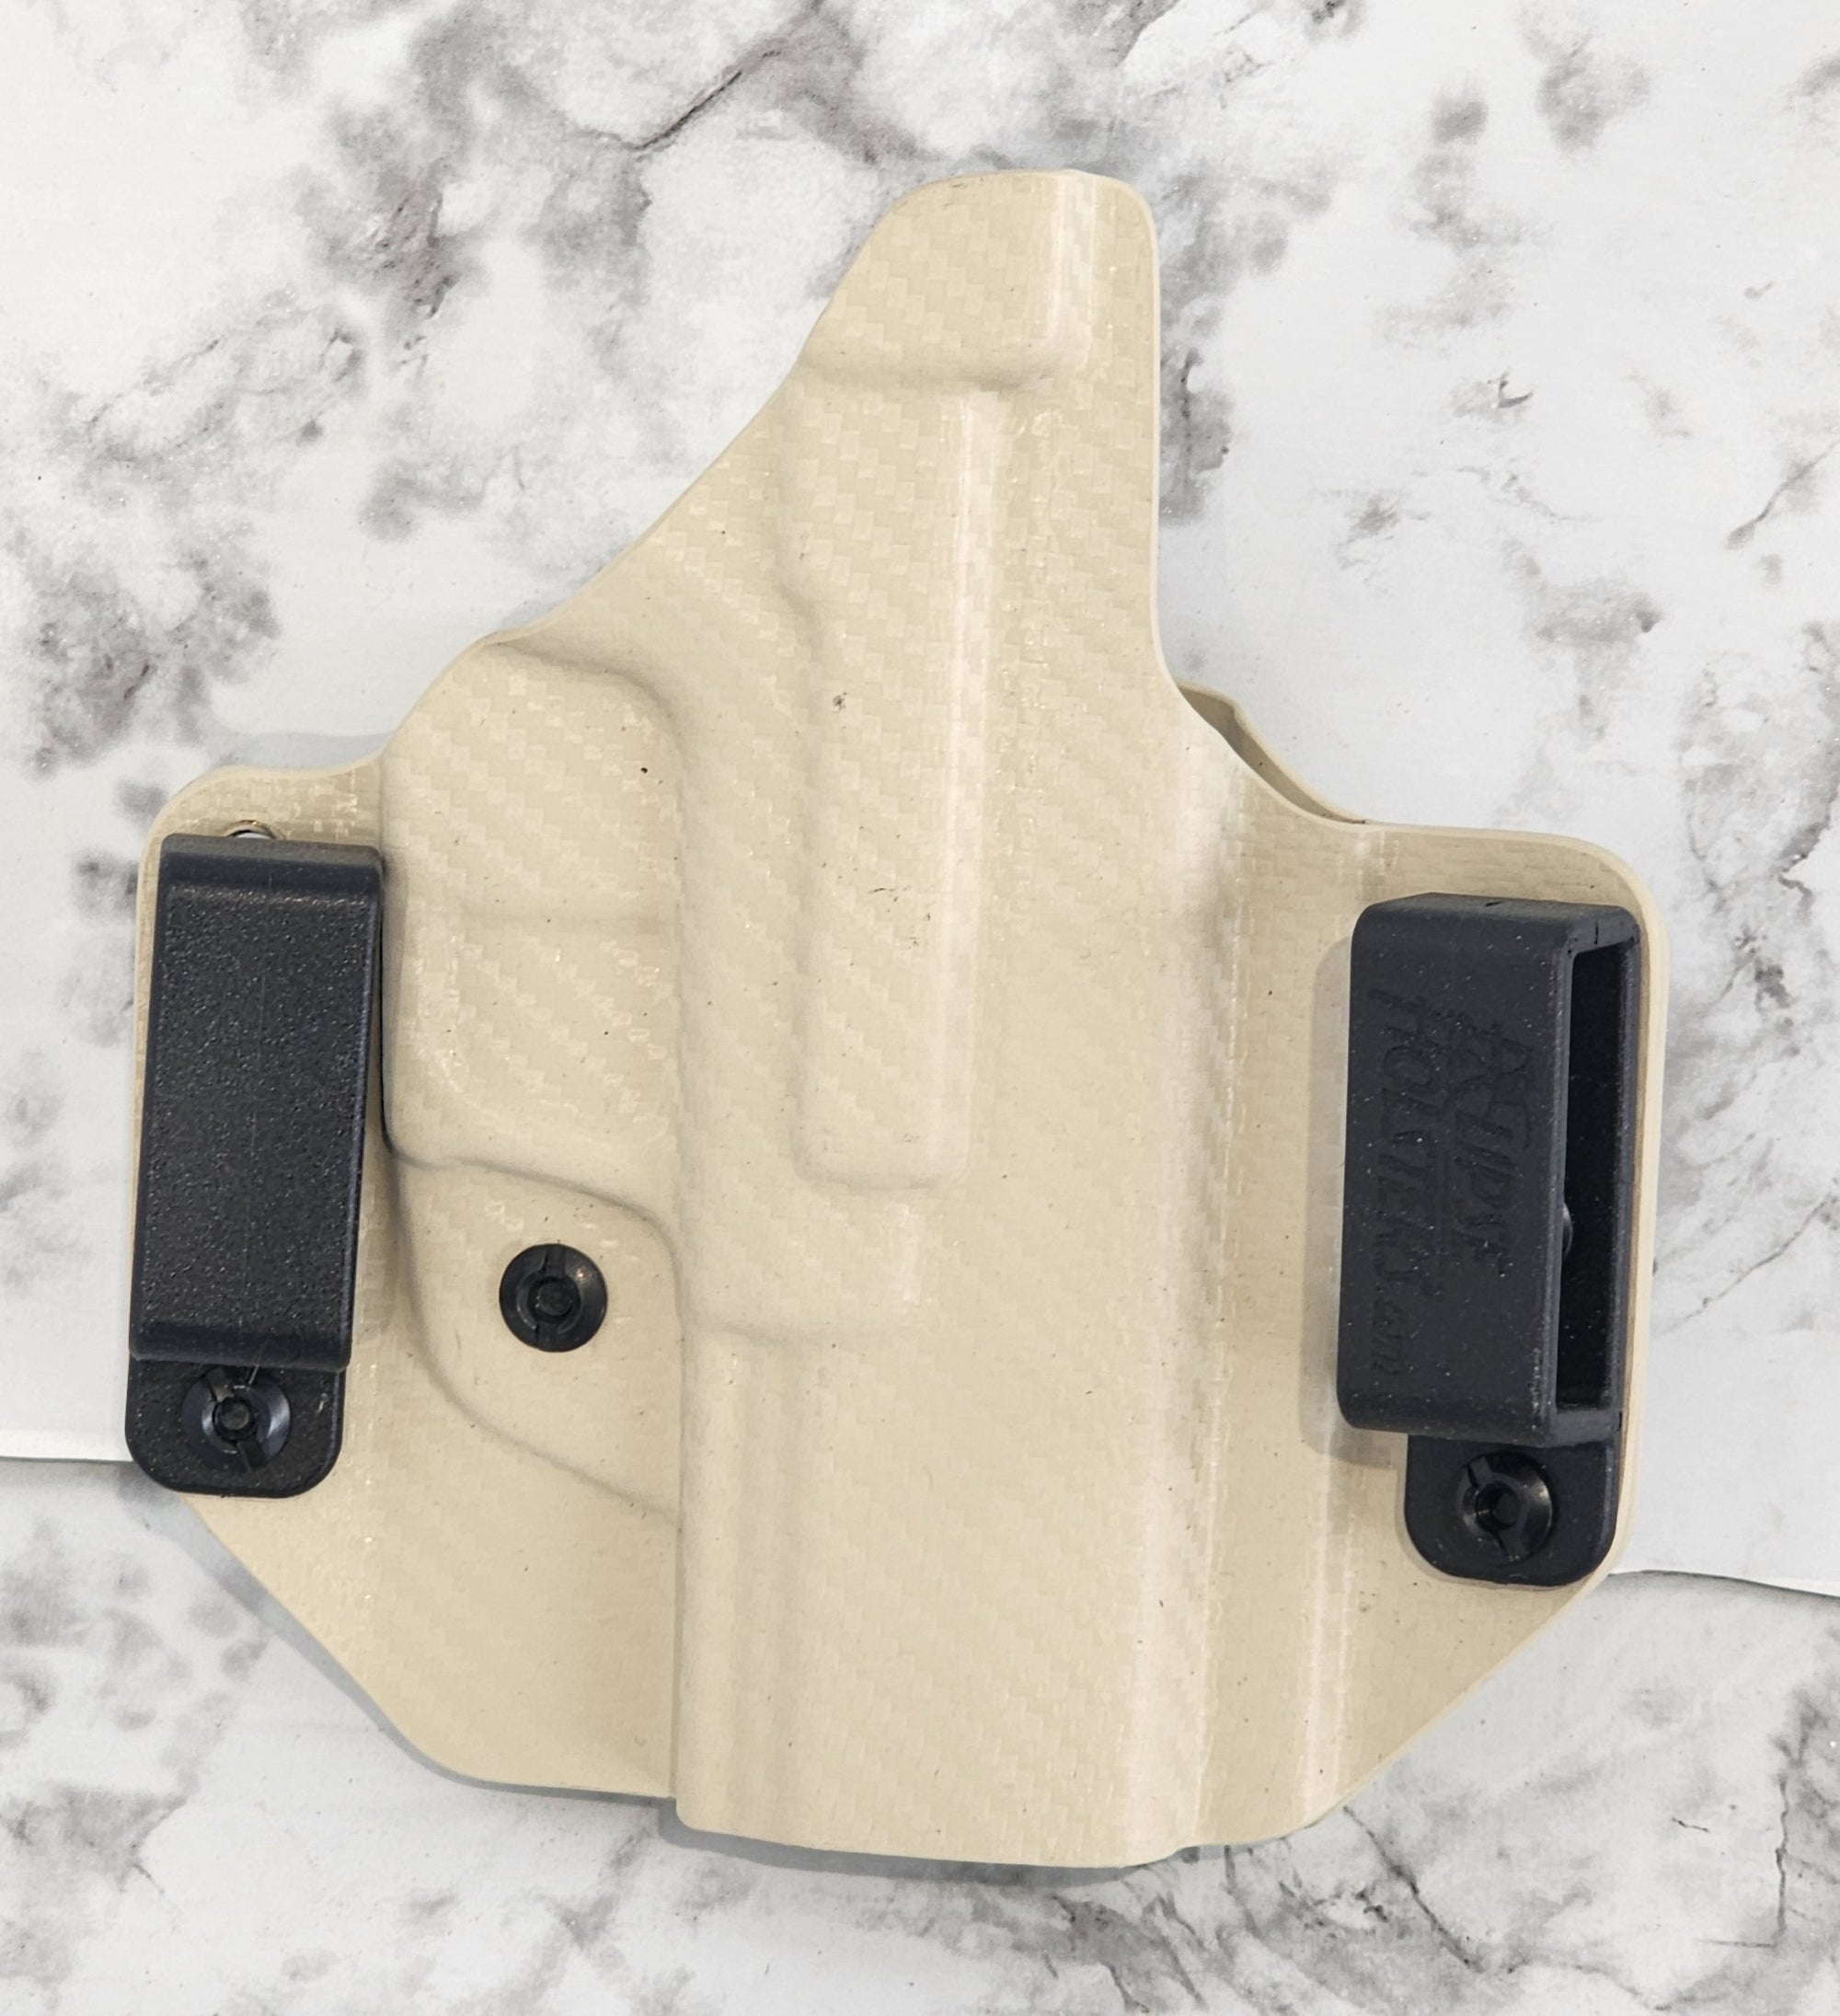 GS-01 Compatible with Springfield XD Subcompact - Gemini Holster - Carbon Fiber Desert Tan on both sides *LEFTY*